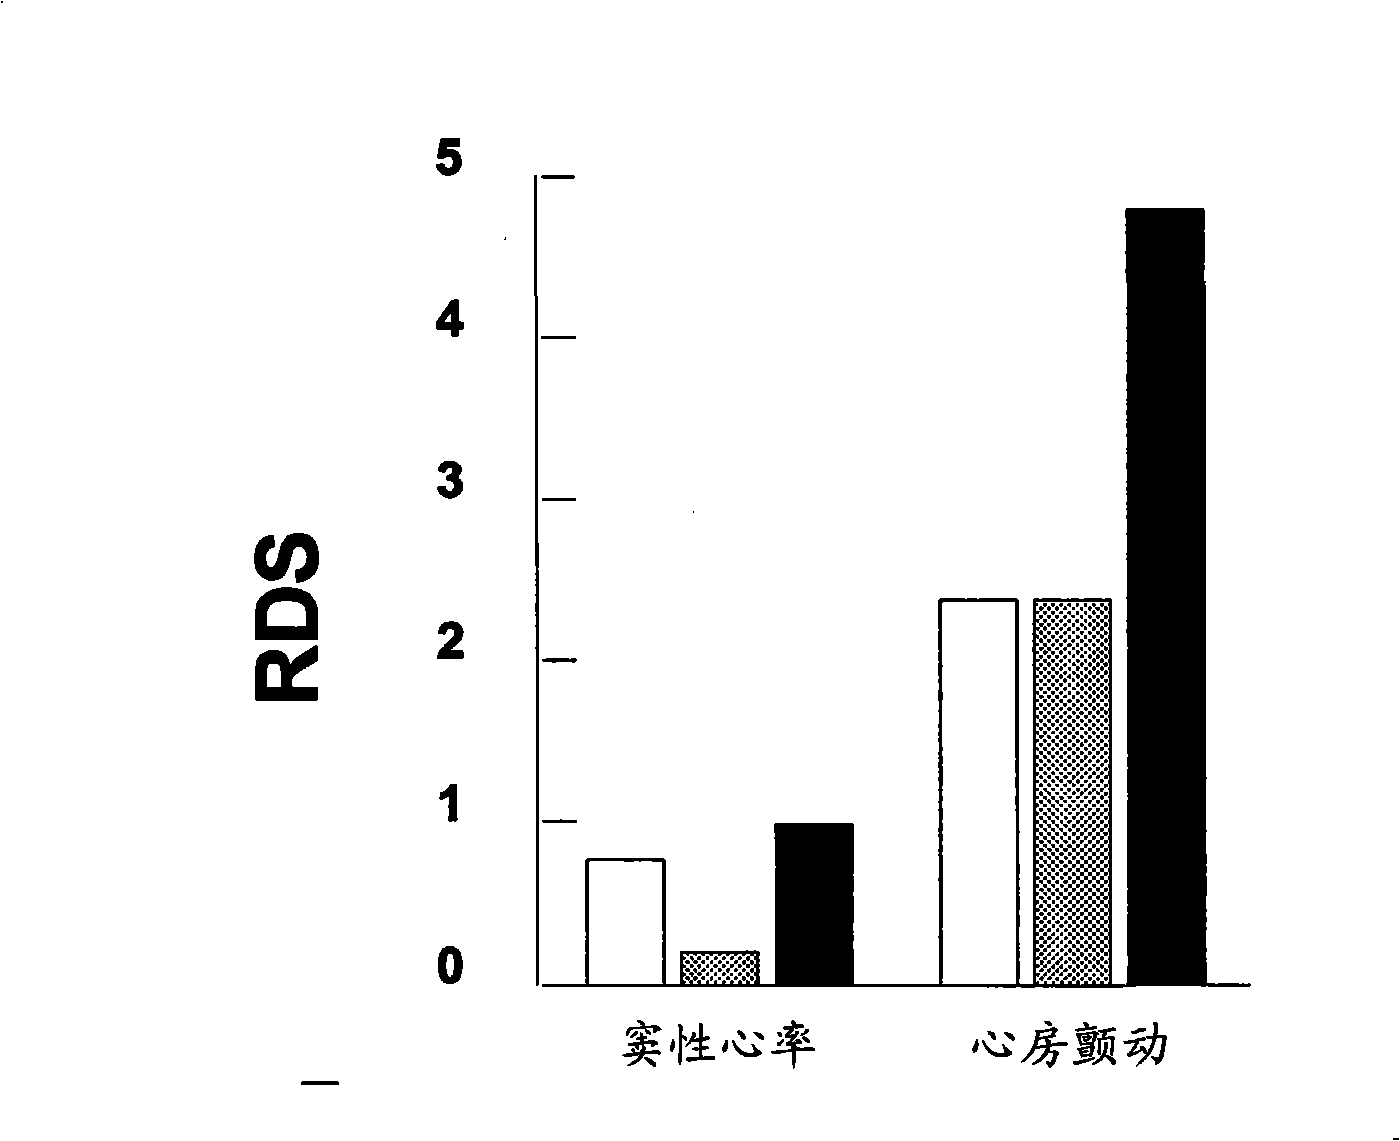 Compounds for the treatment of auricular fibrillation